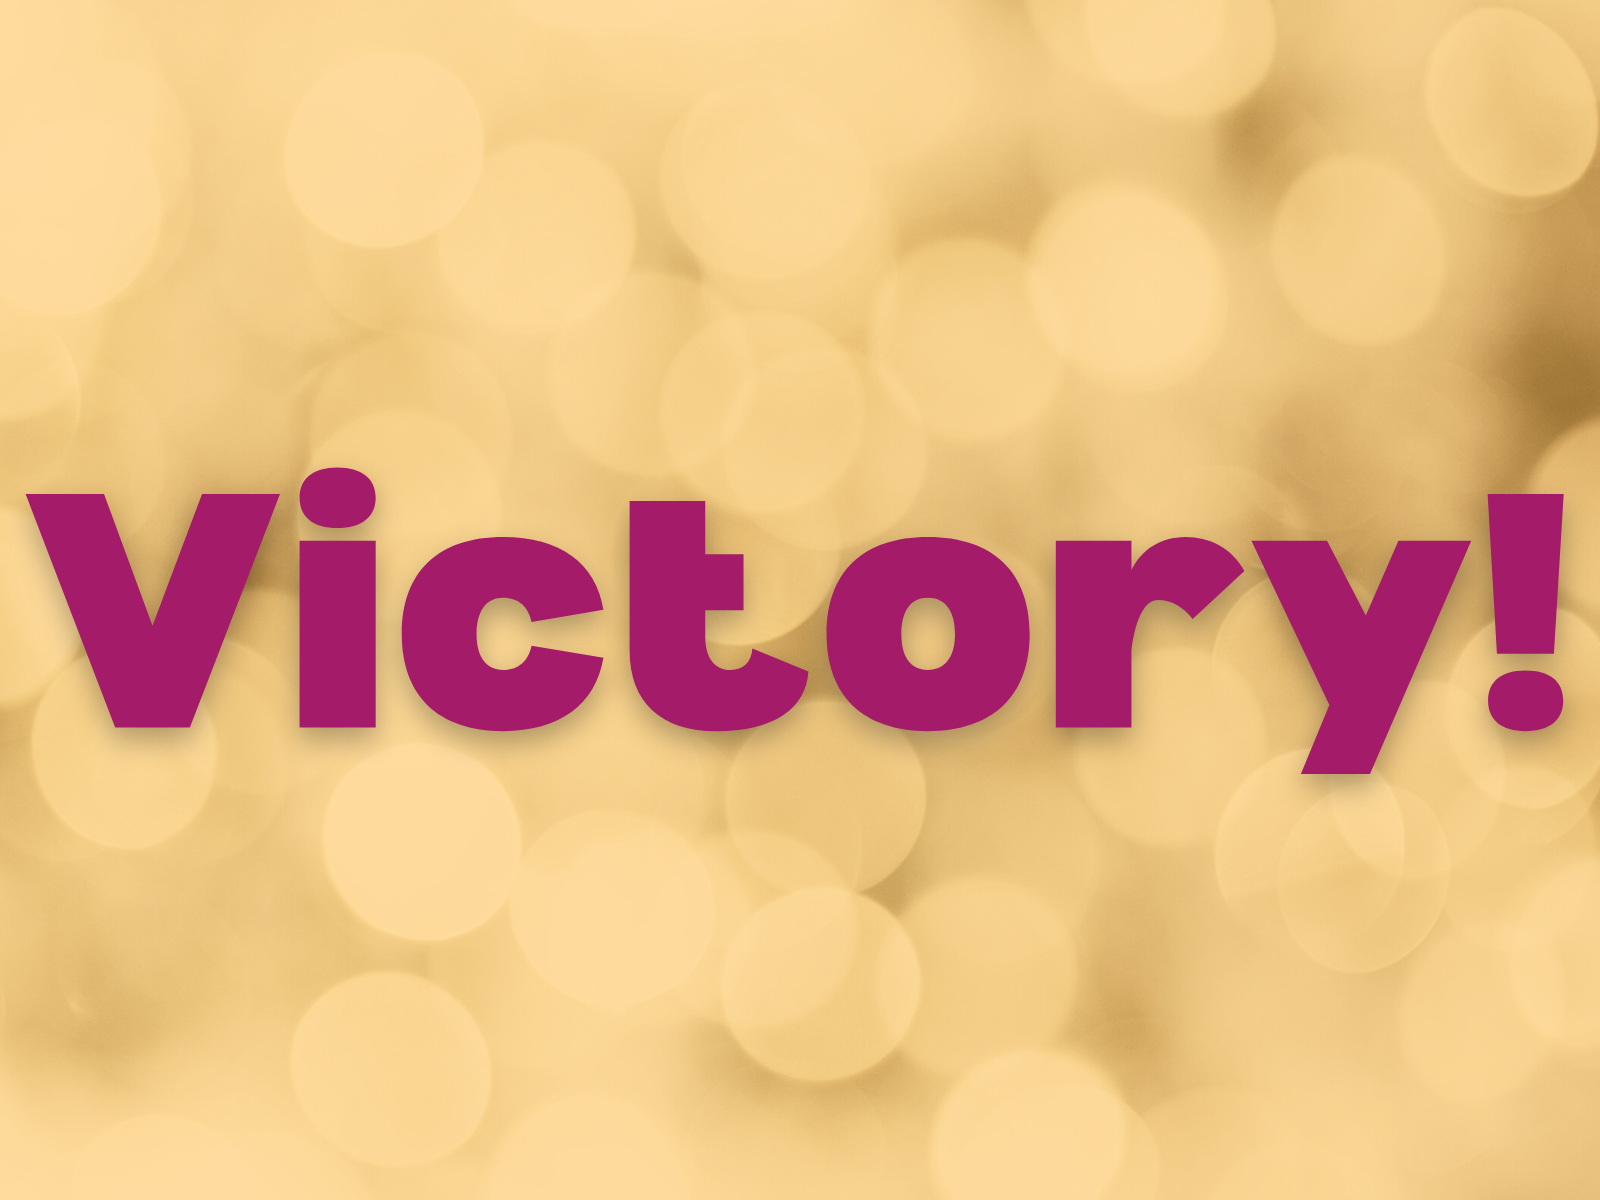 A graphic with the word "Victory!"